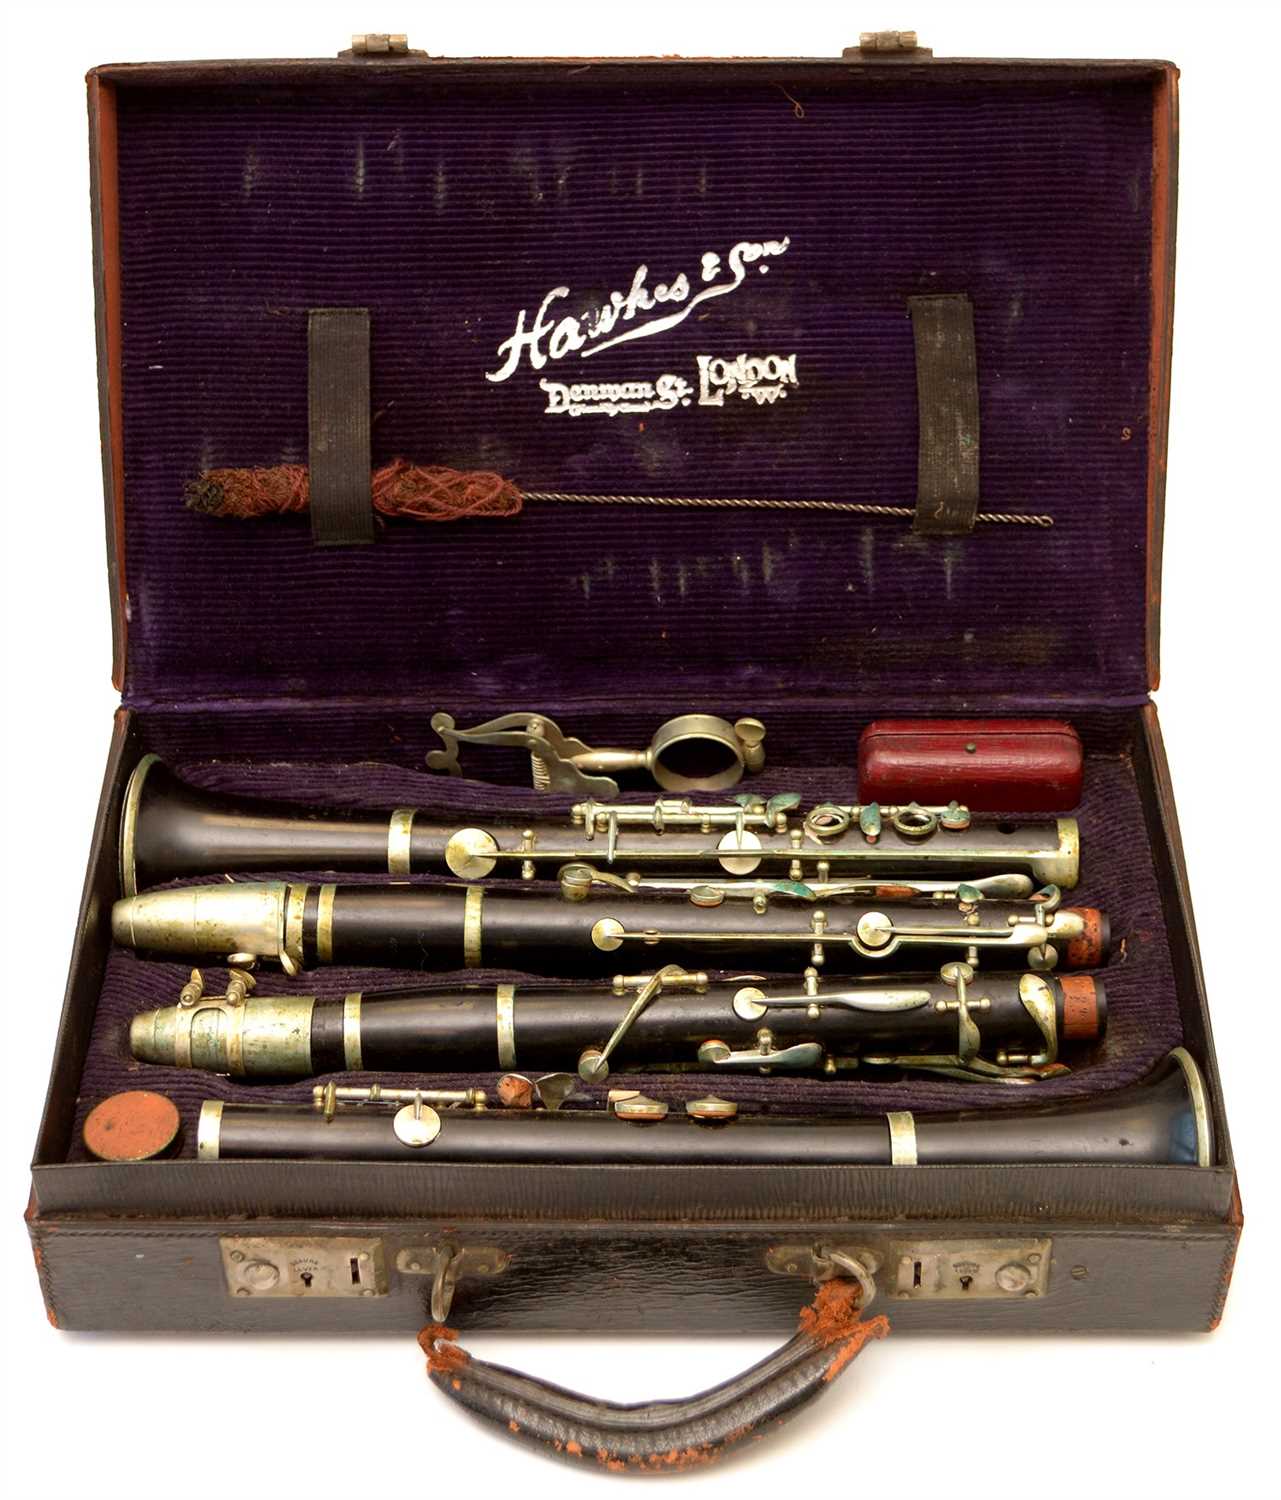 Lot 18 - Pair of Hawkes Clarinets cased